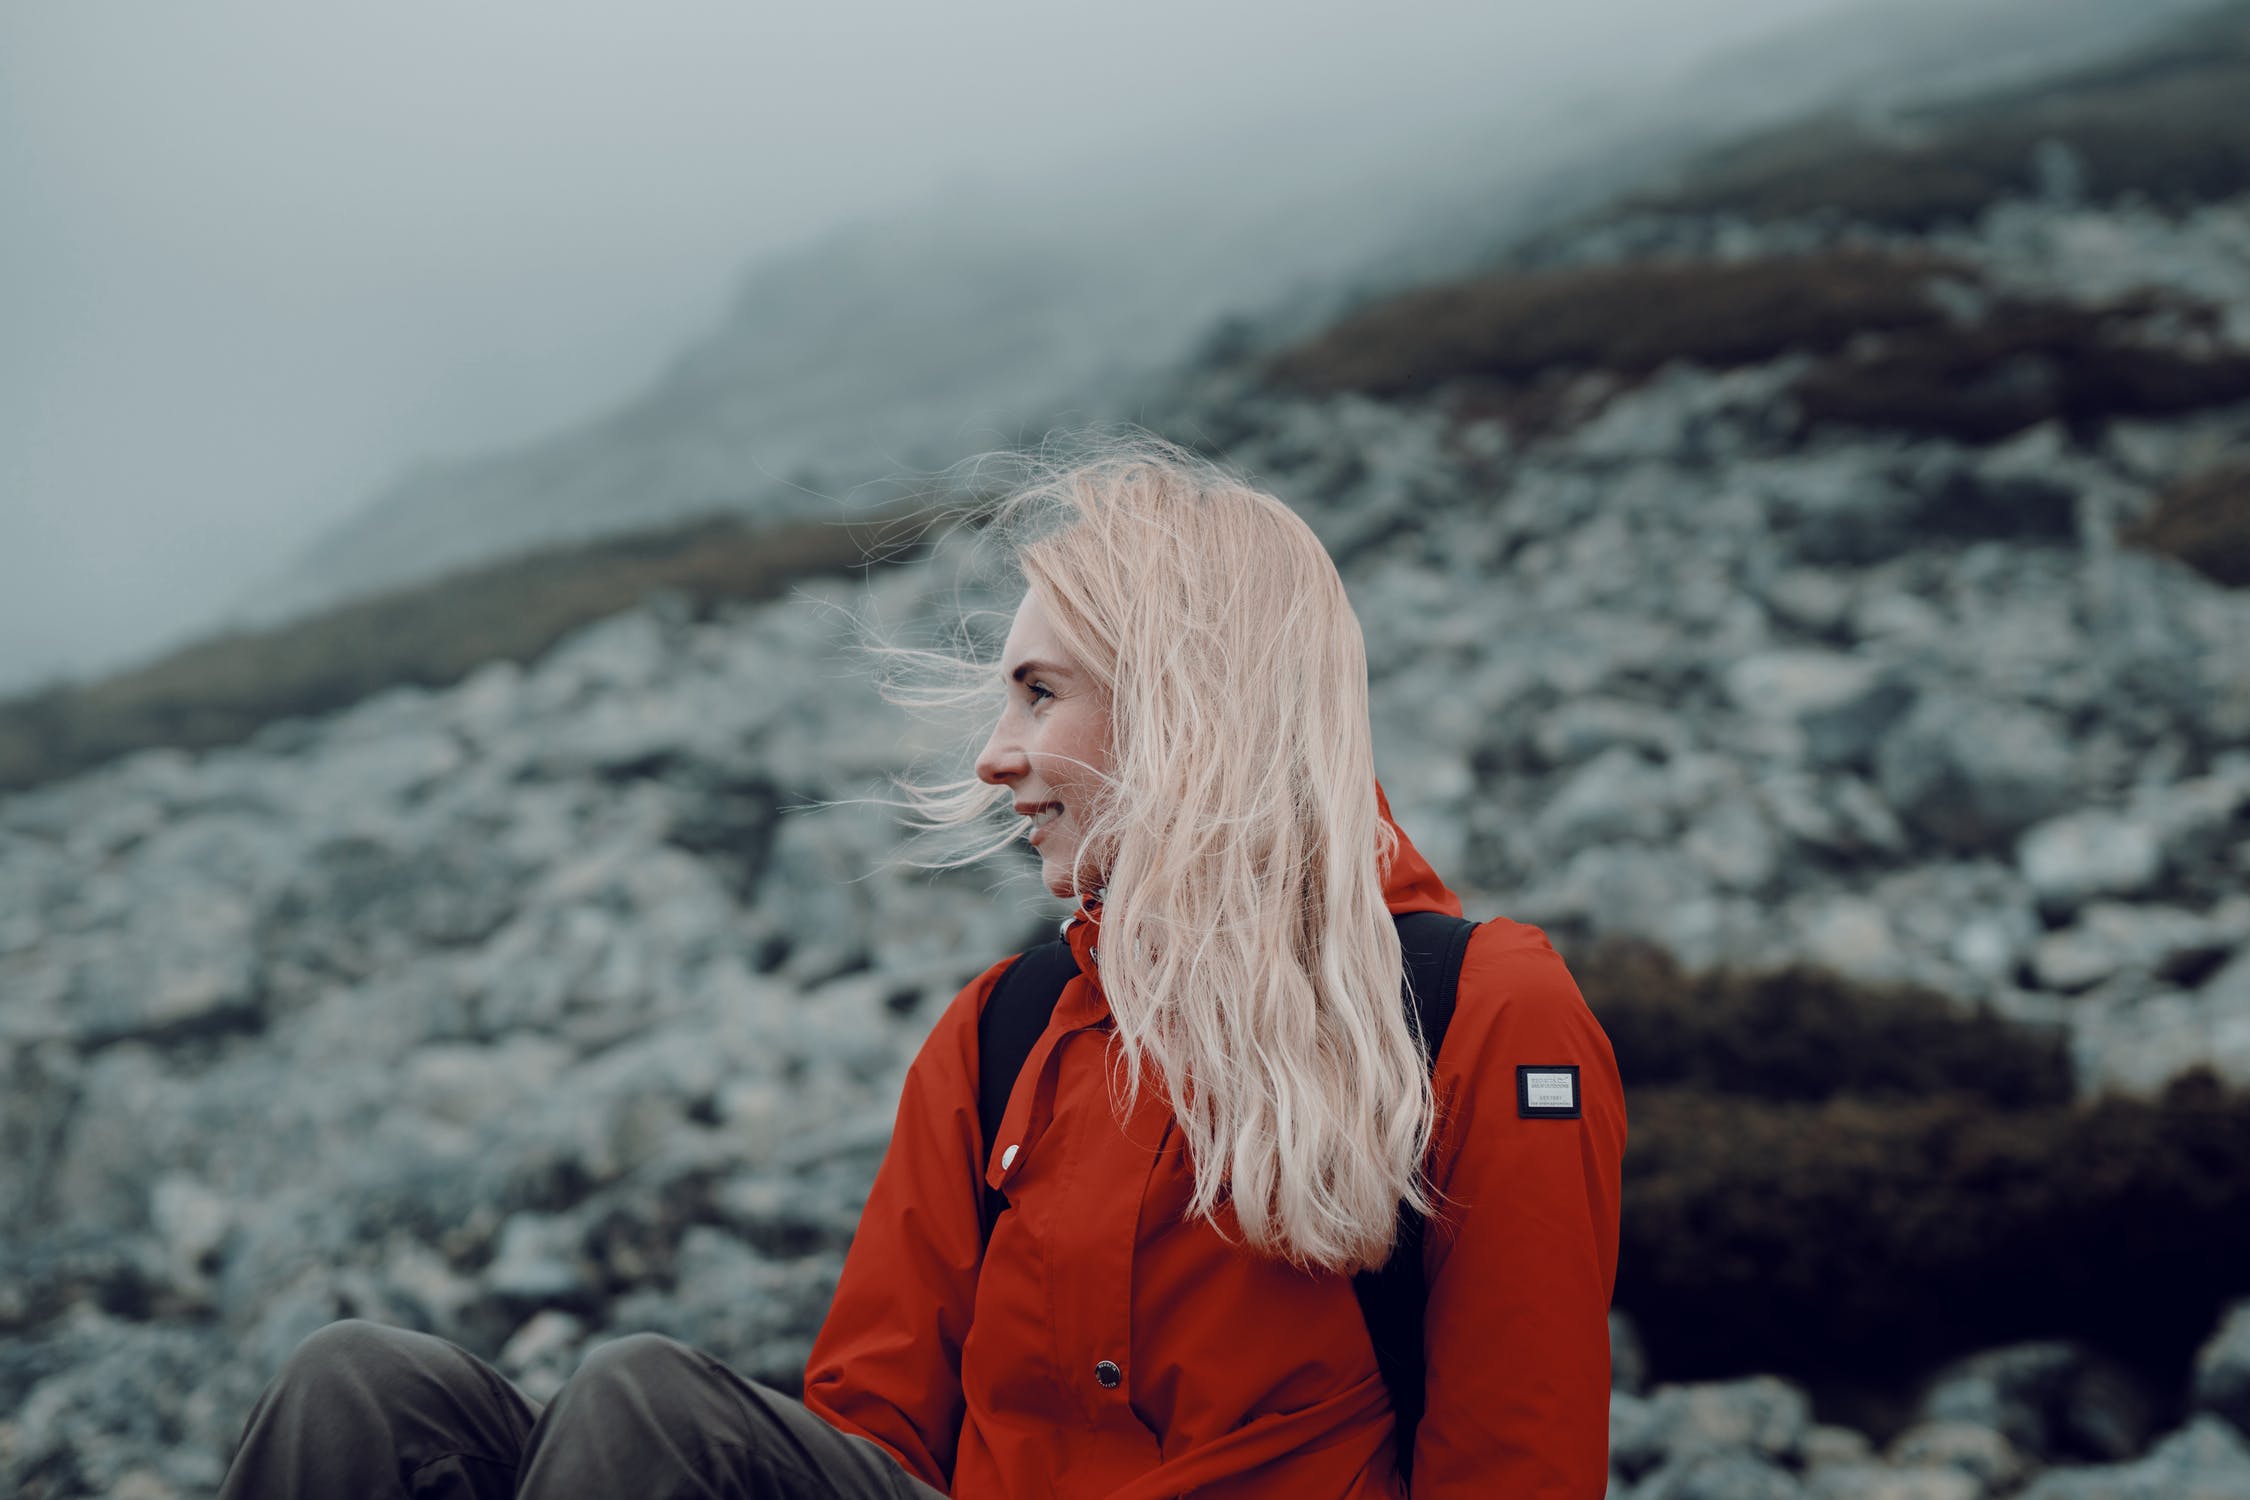 Woman with blonde hair wearing a red jacket sitting on a rocky hillside